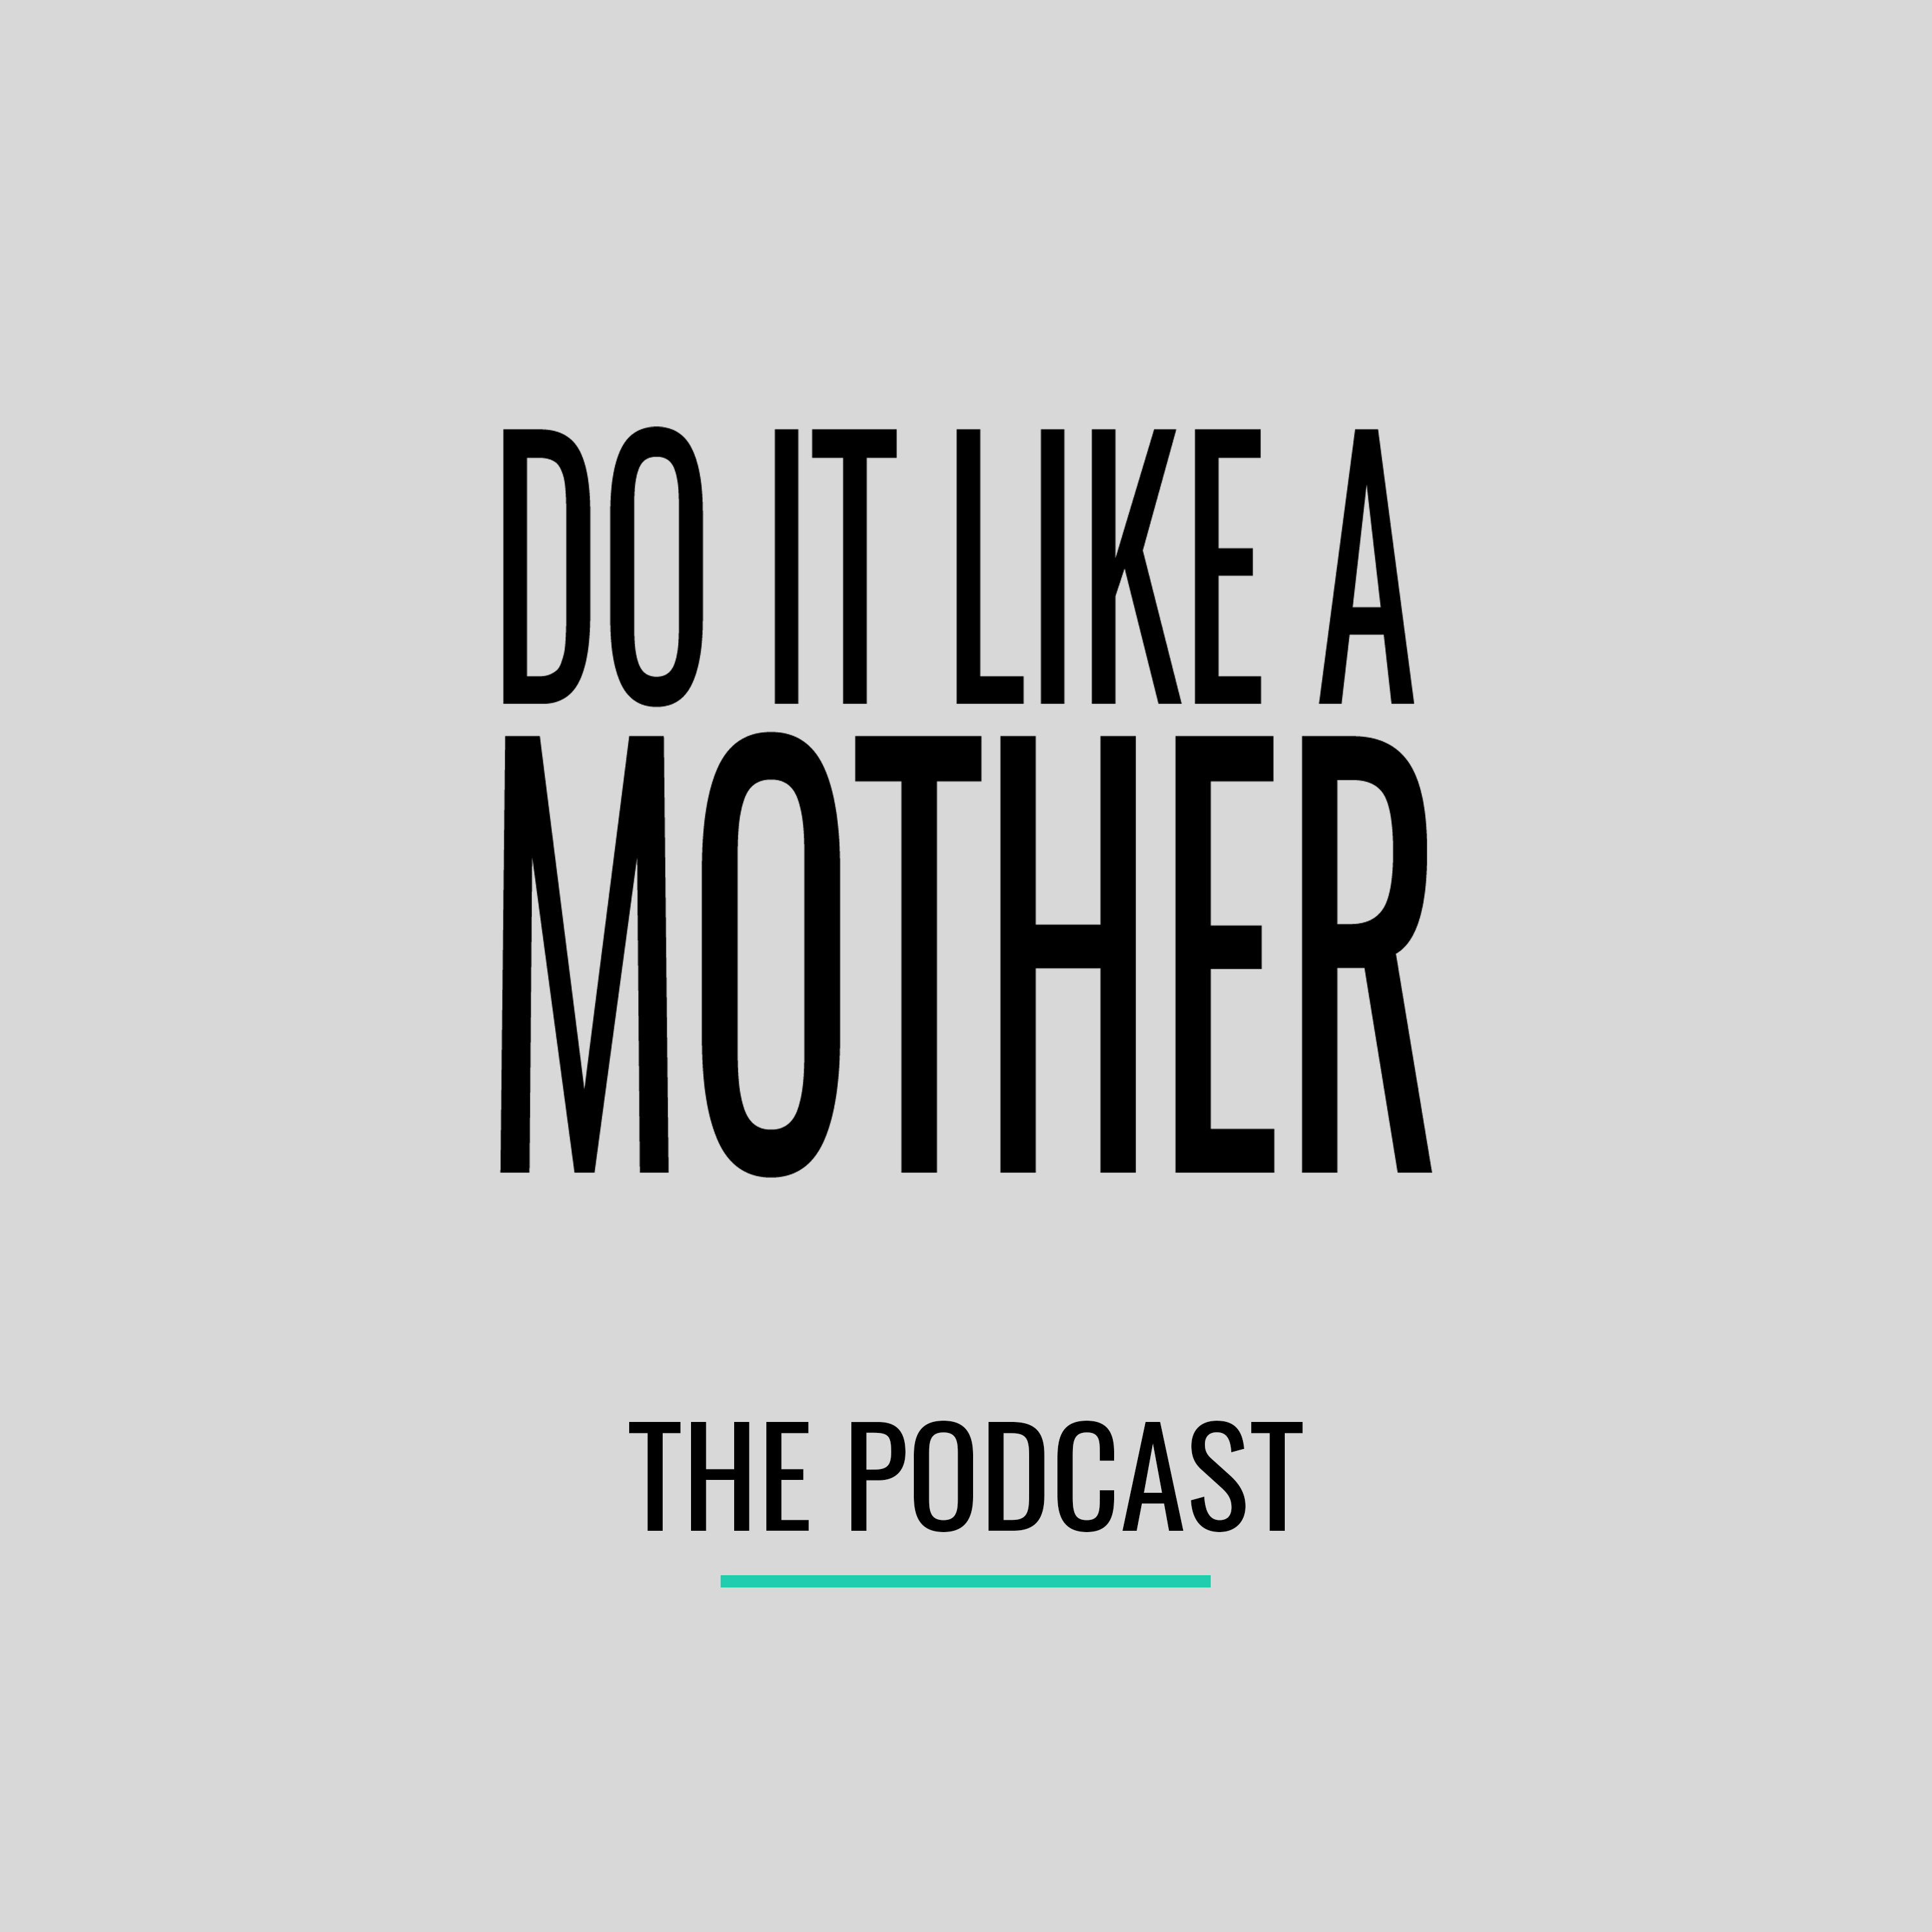 DO IT LIKE A MOTHER - The Podcast